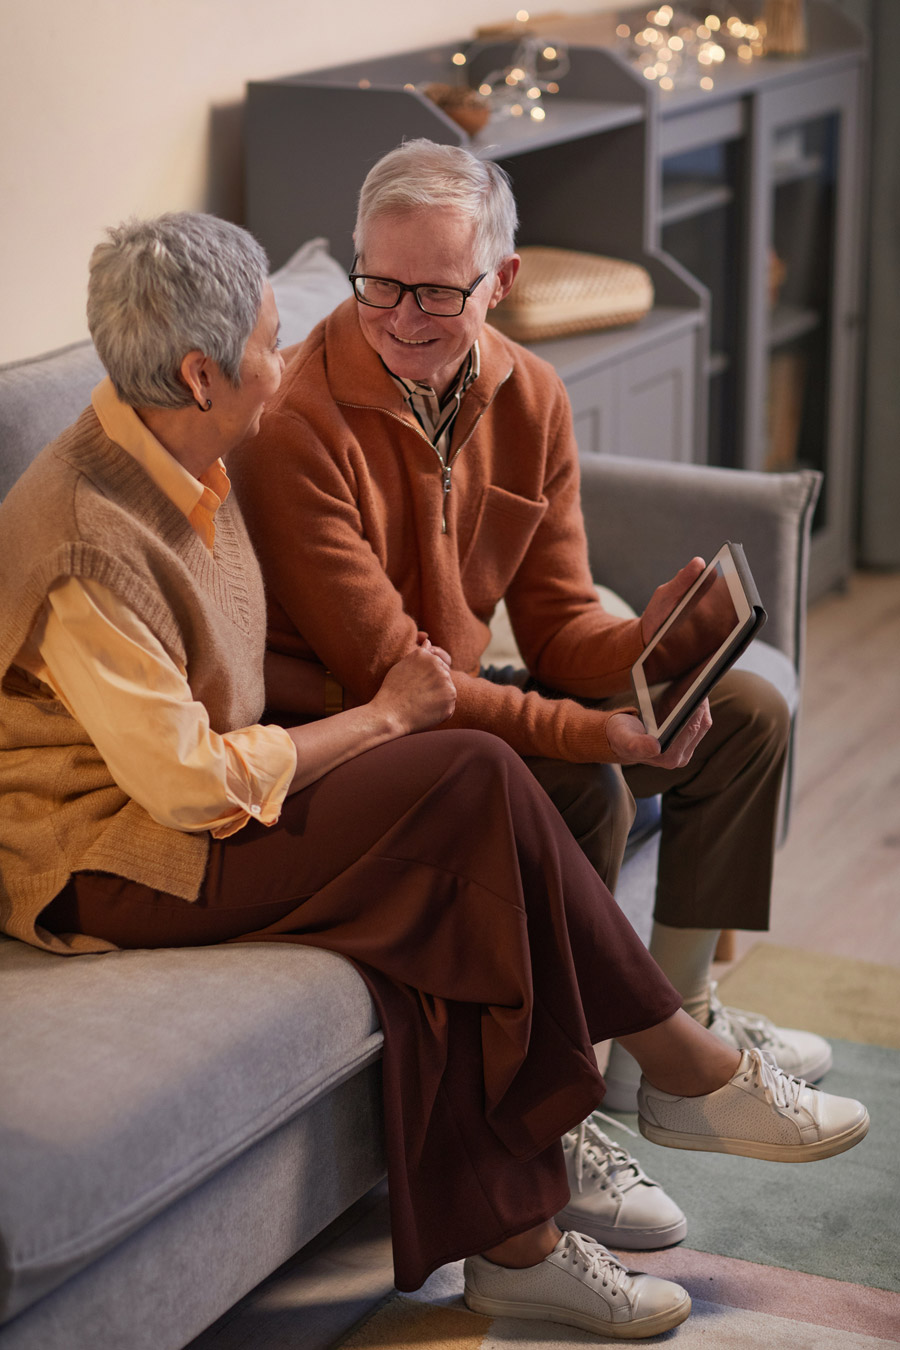 Older adults using tablet while sitting no the couch